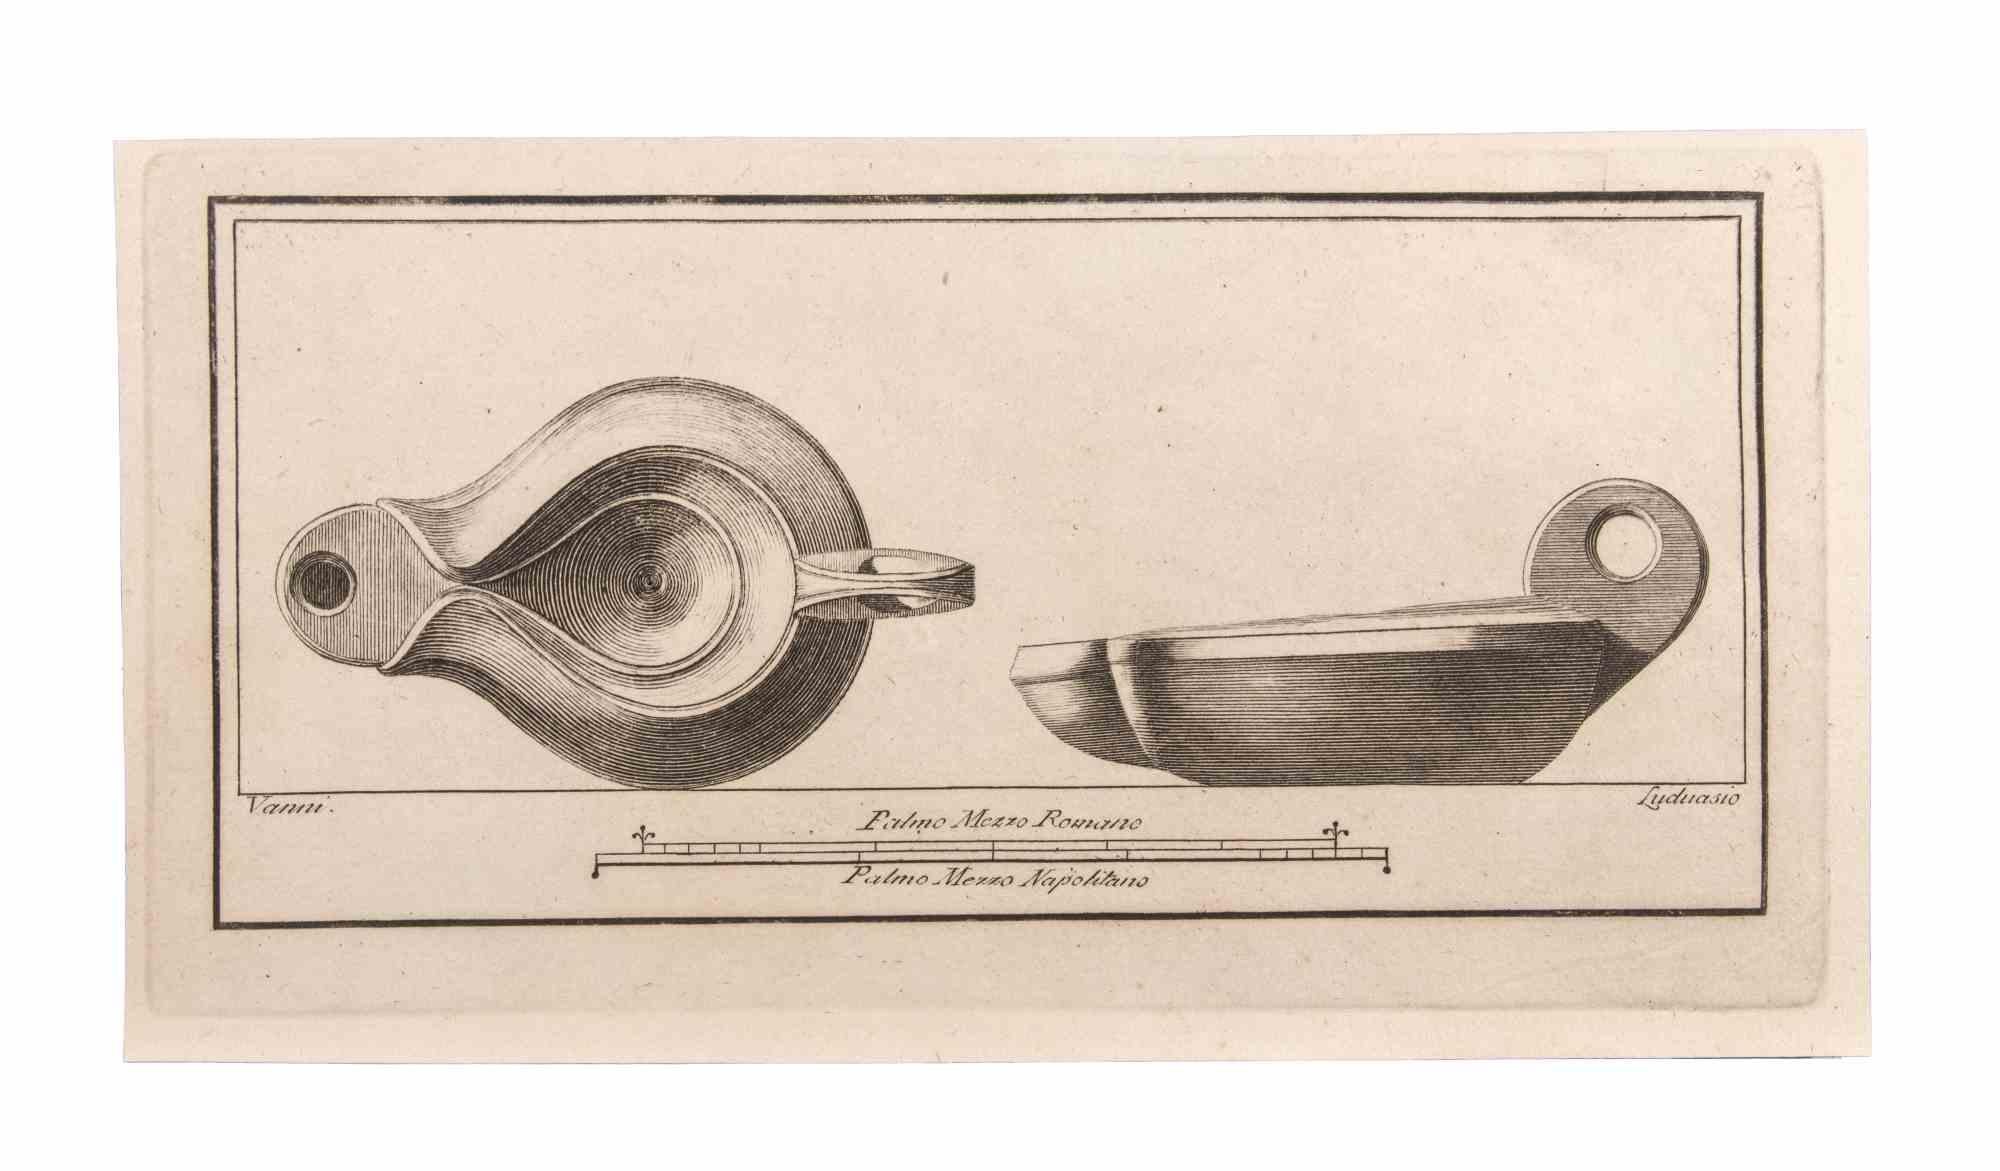 Oil Lamp is an Etching realized by  Niccolò Vanni (1750-1770).

The etching belongs to the print suite “Antiquities of Herculaneum Exposed” (original title: “Le Antichità di Ercolano Esposte”), an eight-volume volume of engravings of the finds from